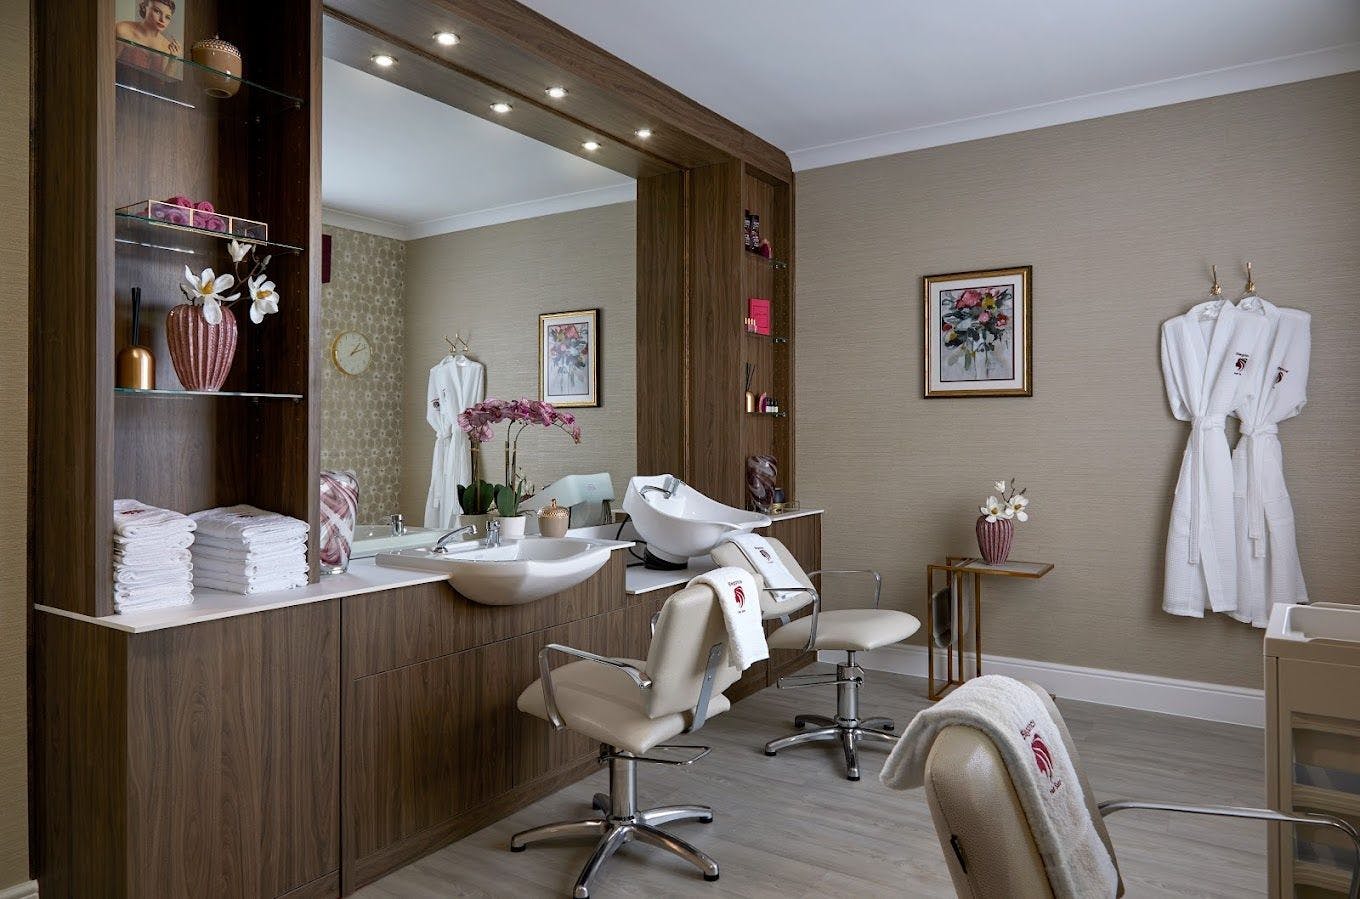 Salon at The Moat House Care Home, Great Easton, Great Dunmow, Essex